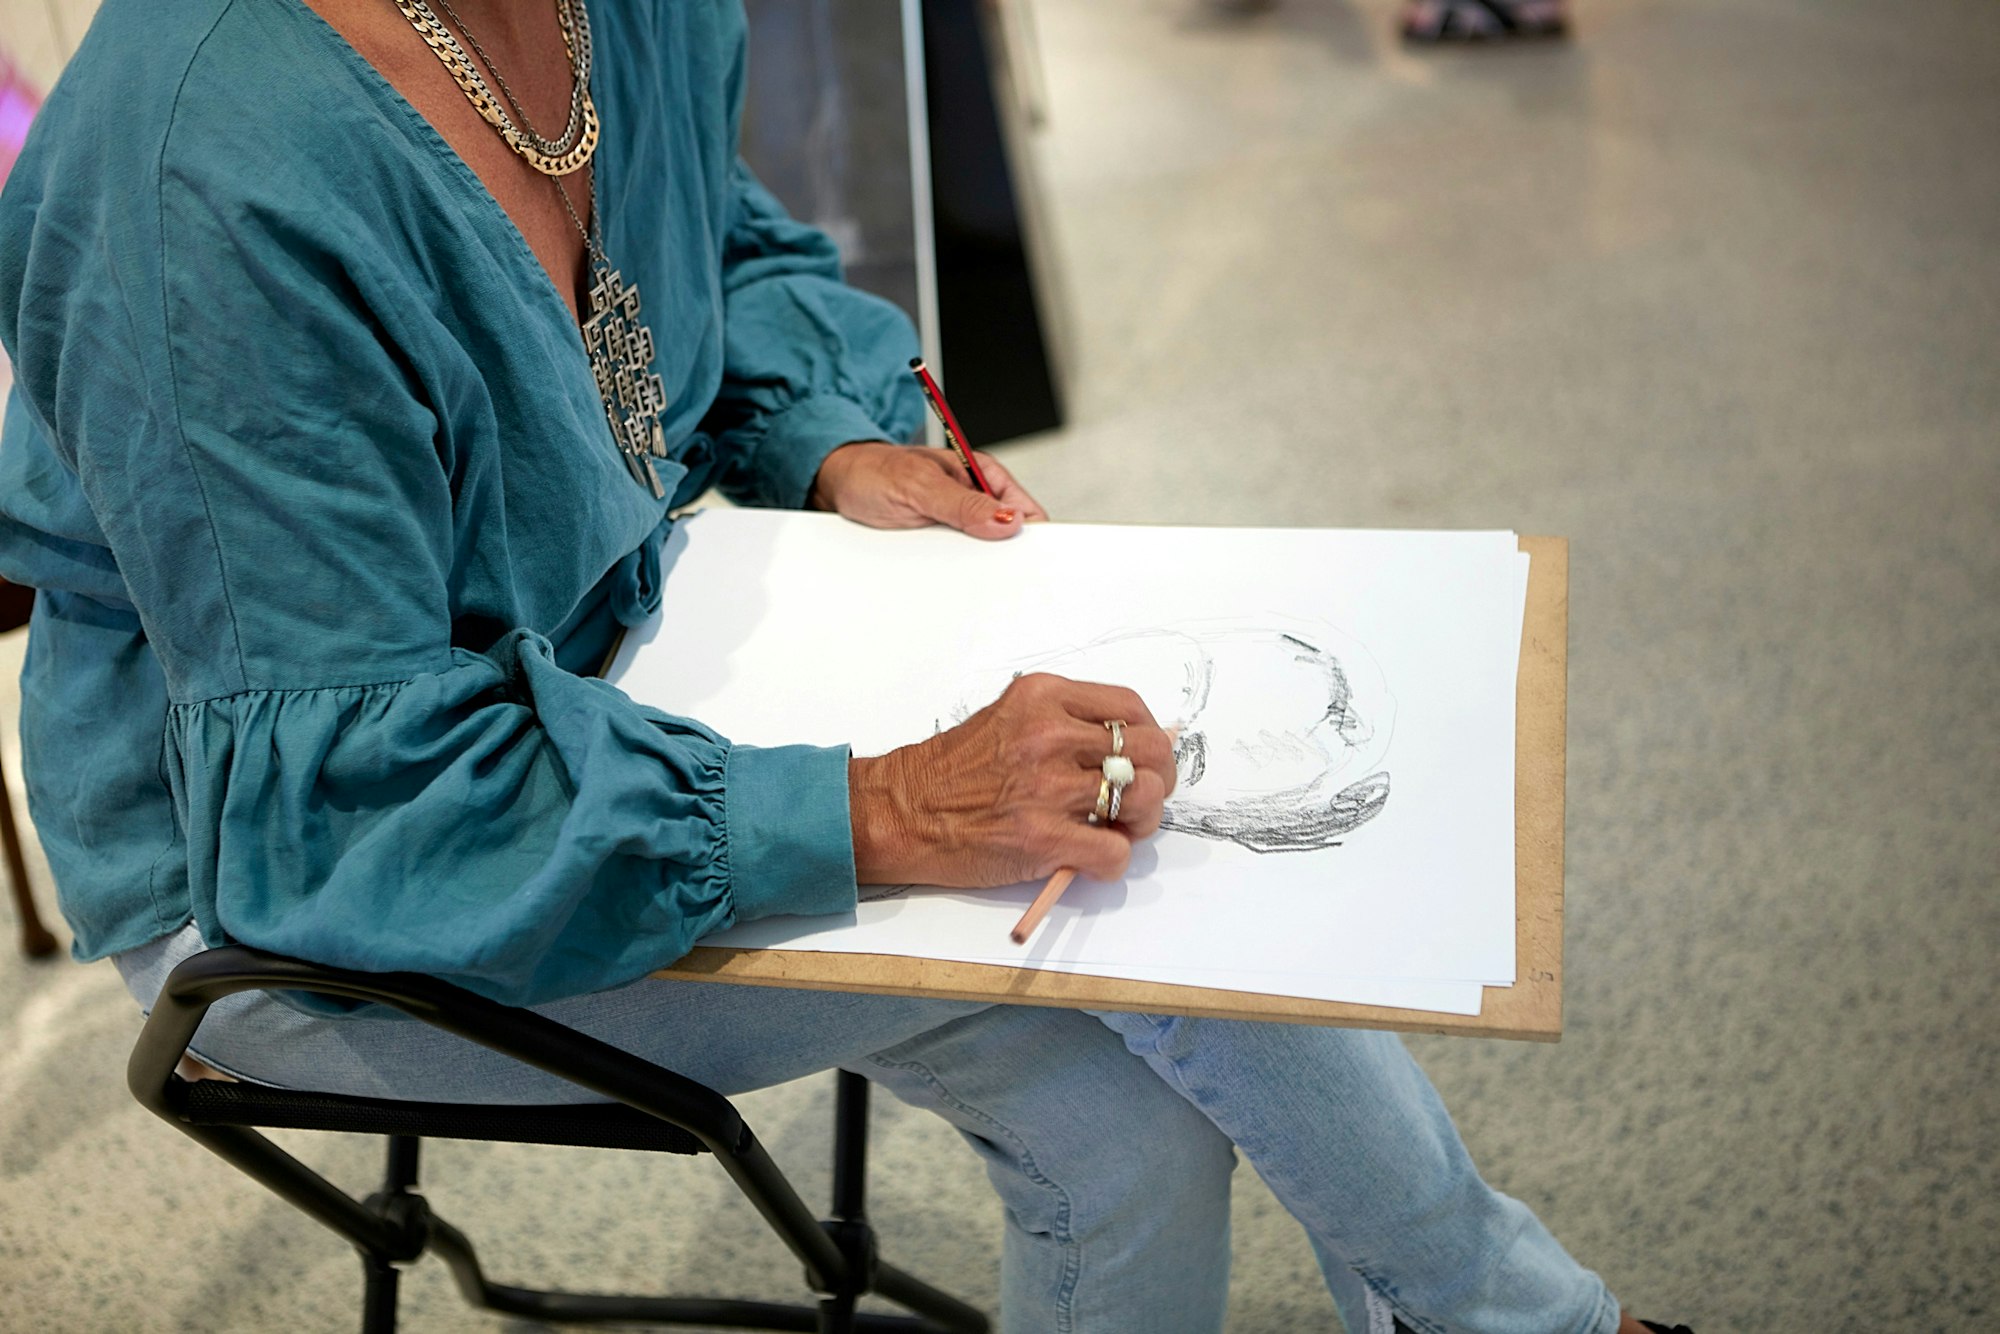 A seated person sketches with a pencil on paper, which rests on a board on their lap